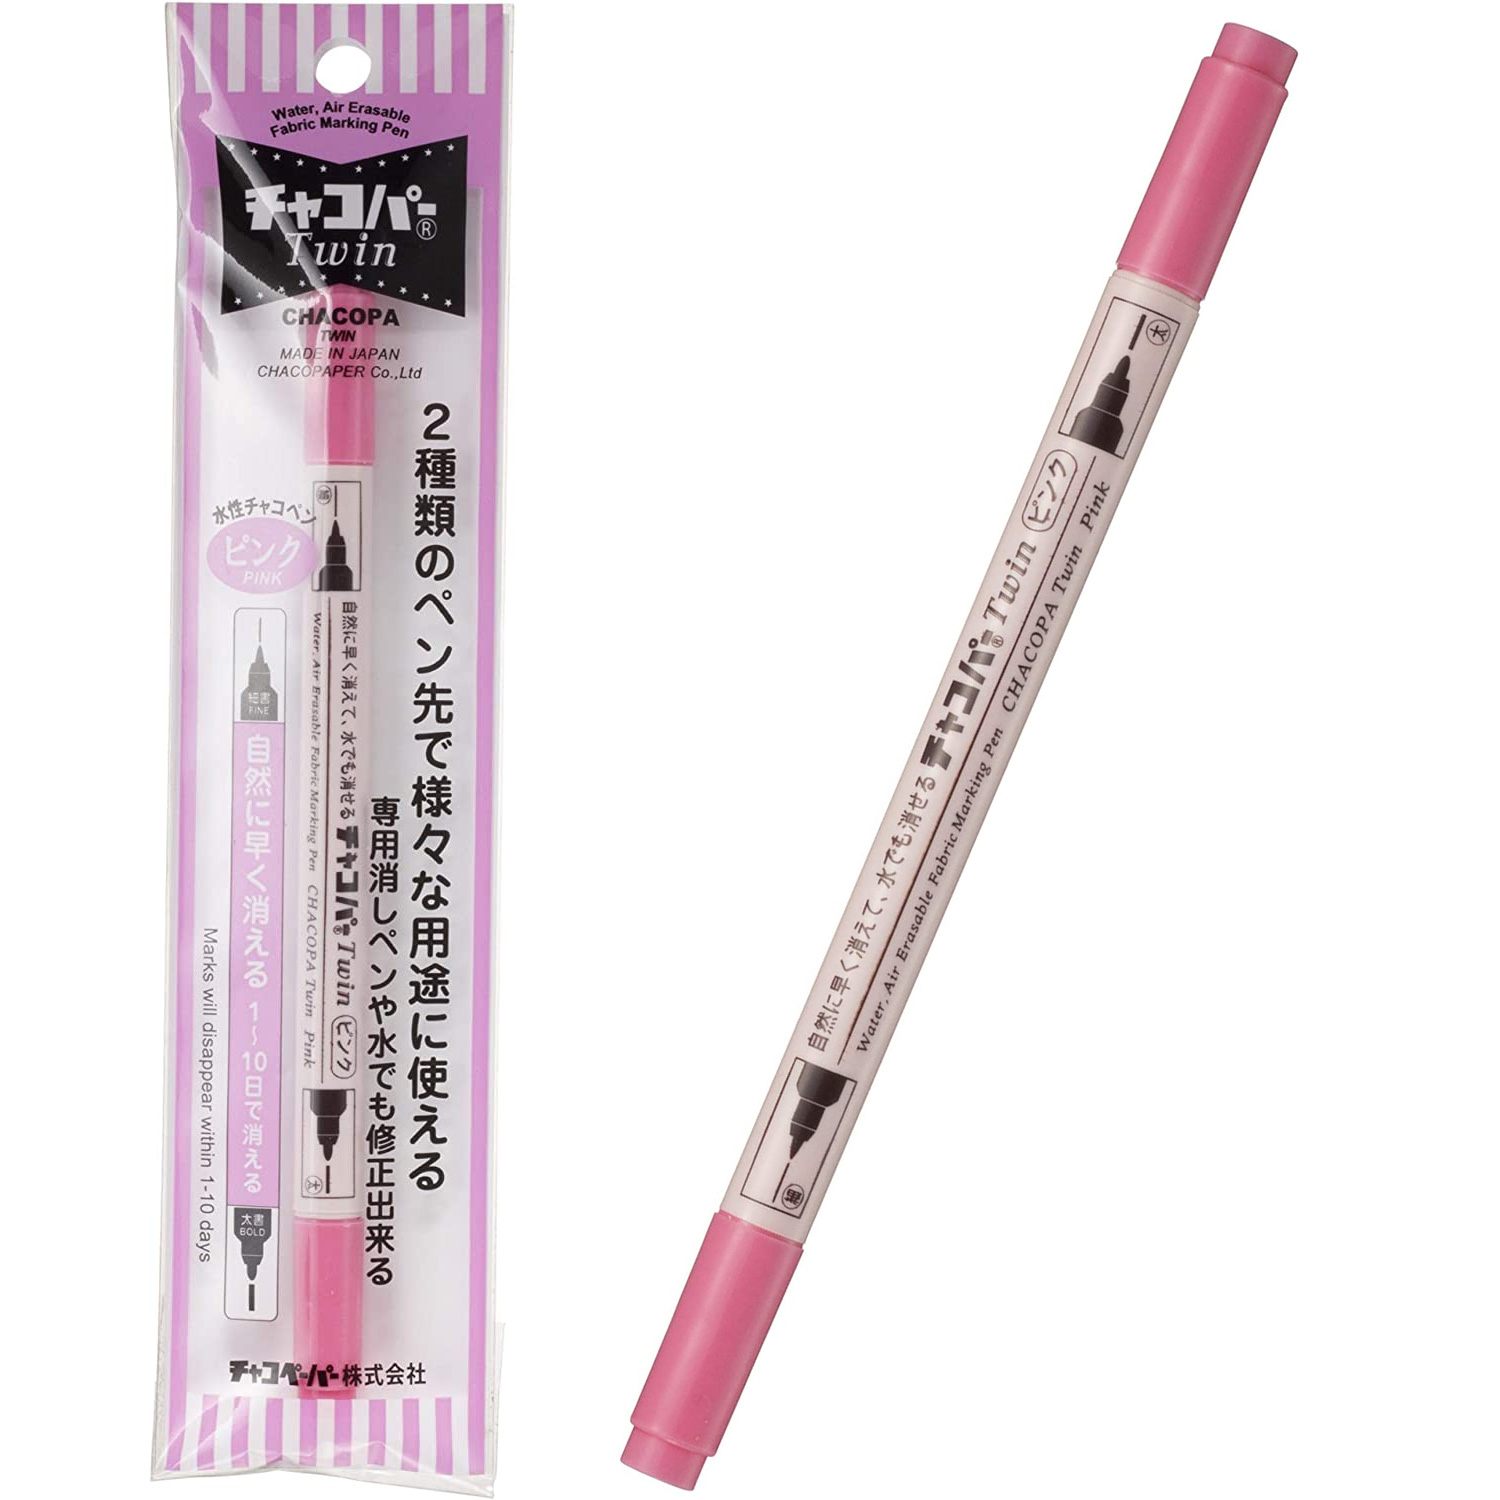 F5-PK Water-based Chaco Pen Chacopa Twin pink", length 14cm (pcs)